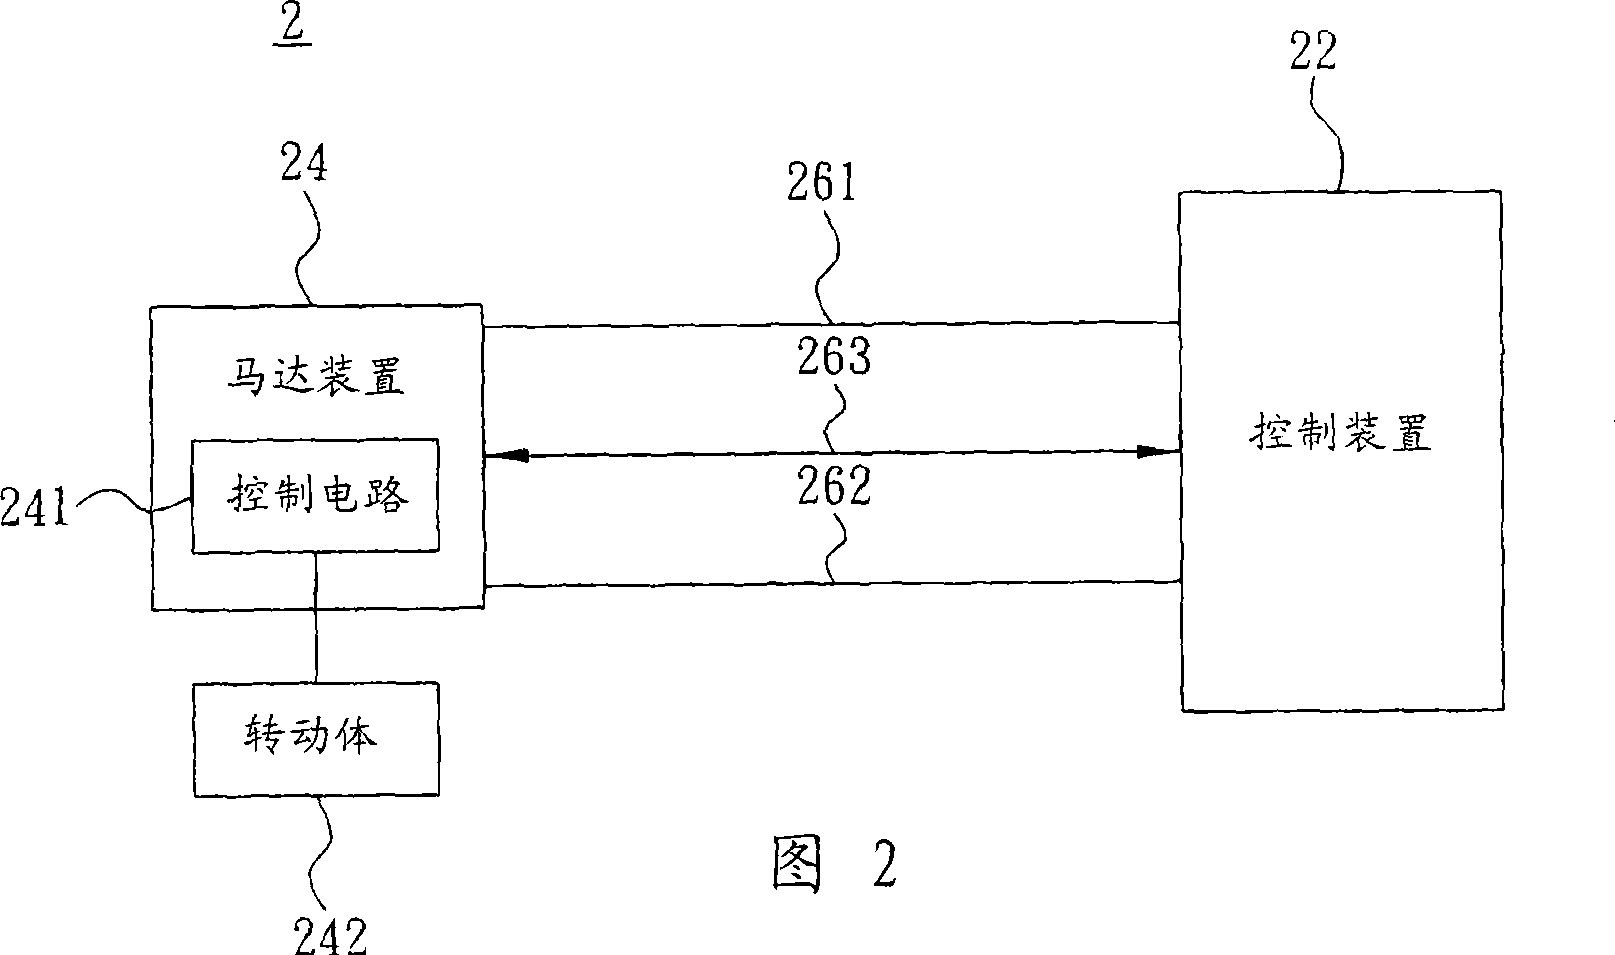 Motor device and motor control speed system